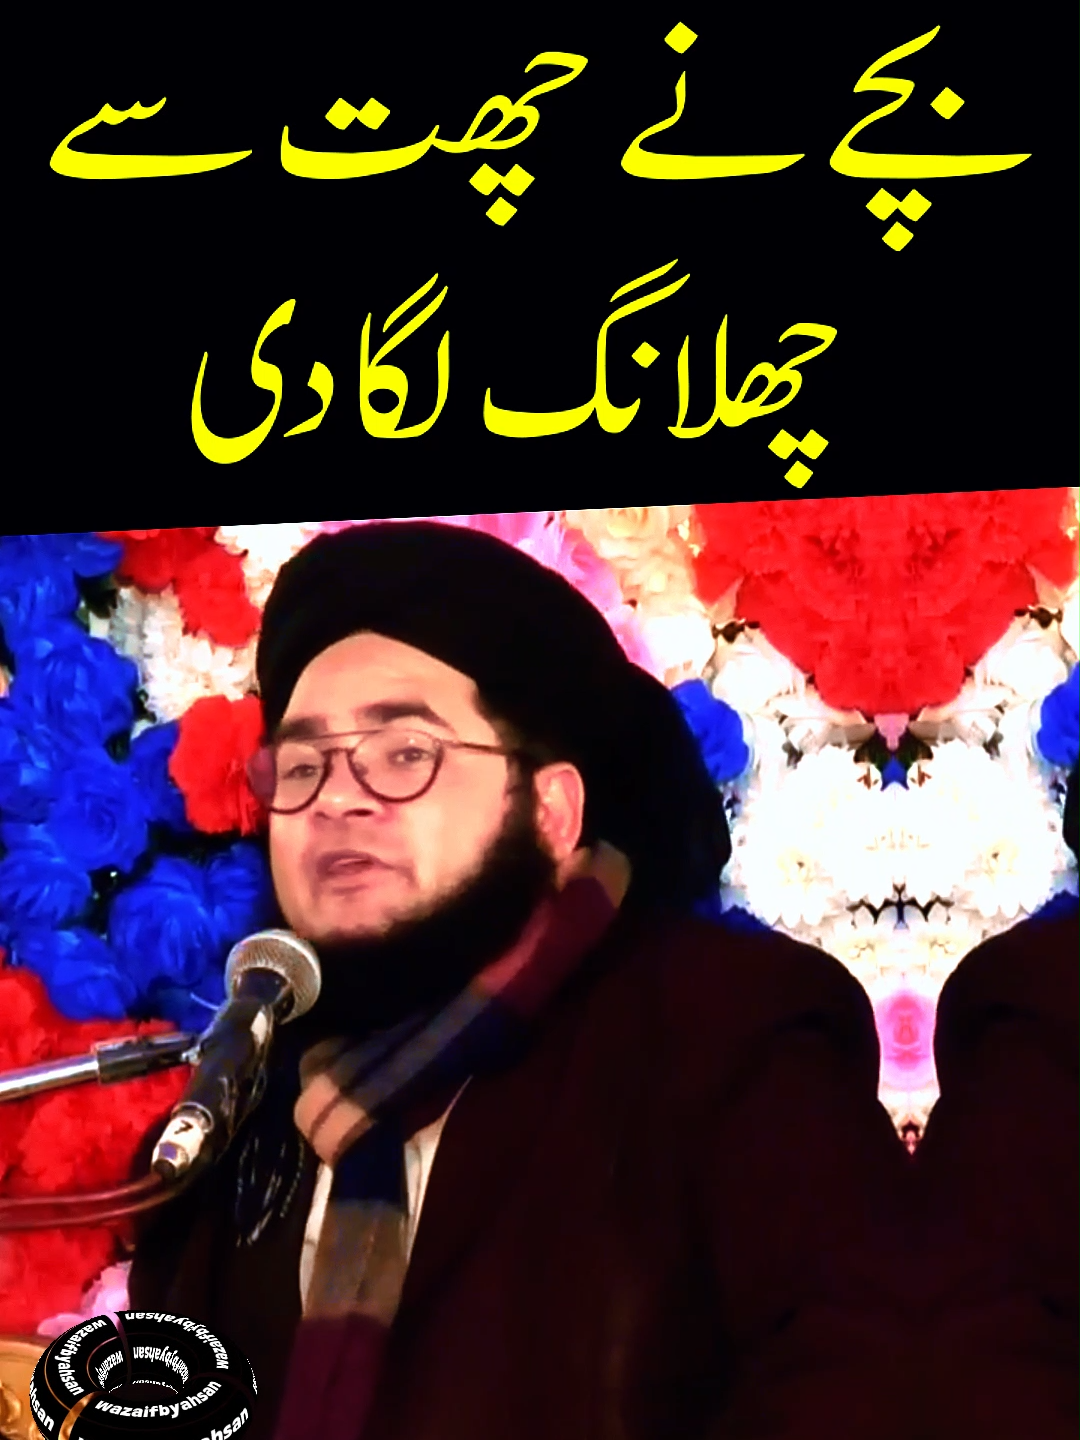 Nasir Madni Funny Video #foryoupage #foryou #funny #viral #funnyvideos